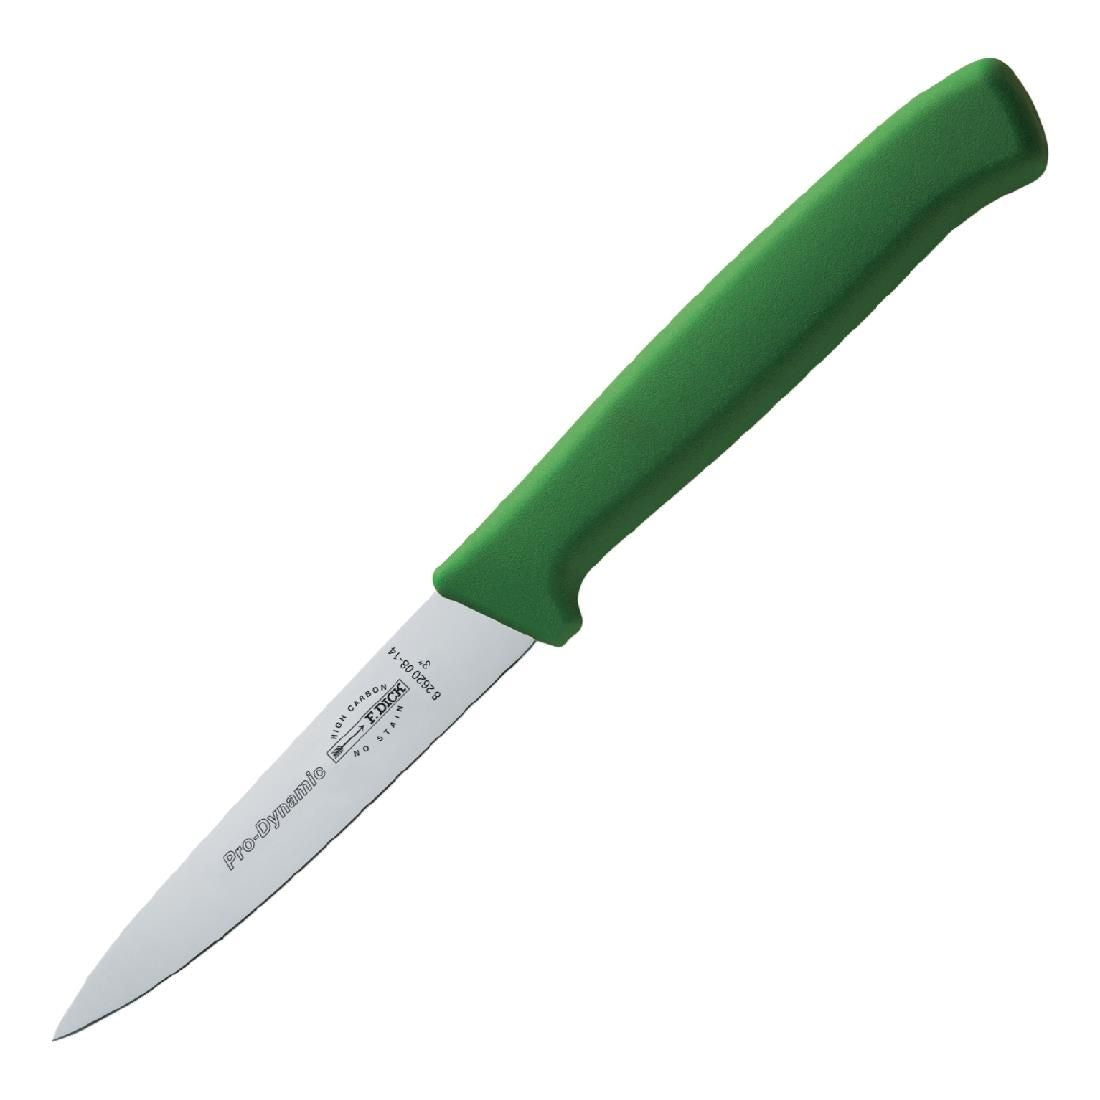 DL363 Dick Pro Dynamic HACCP Kitchen Knife Green 7.5cm JD Catering Equipment Solutions Ltd